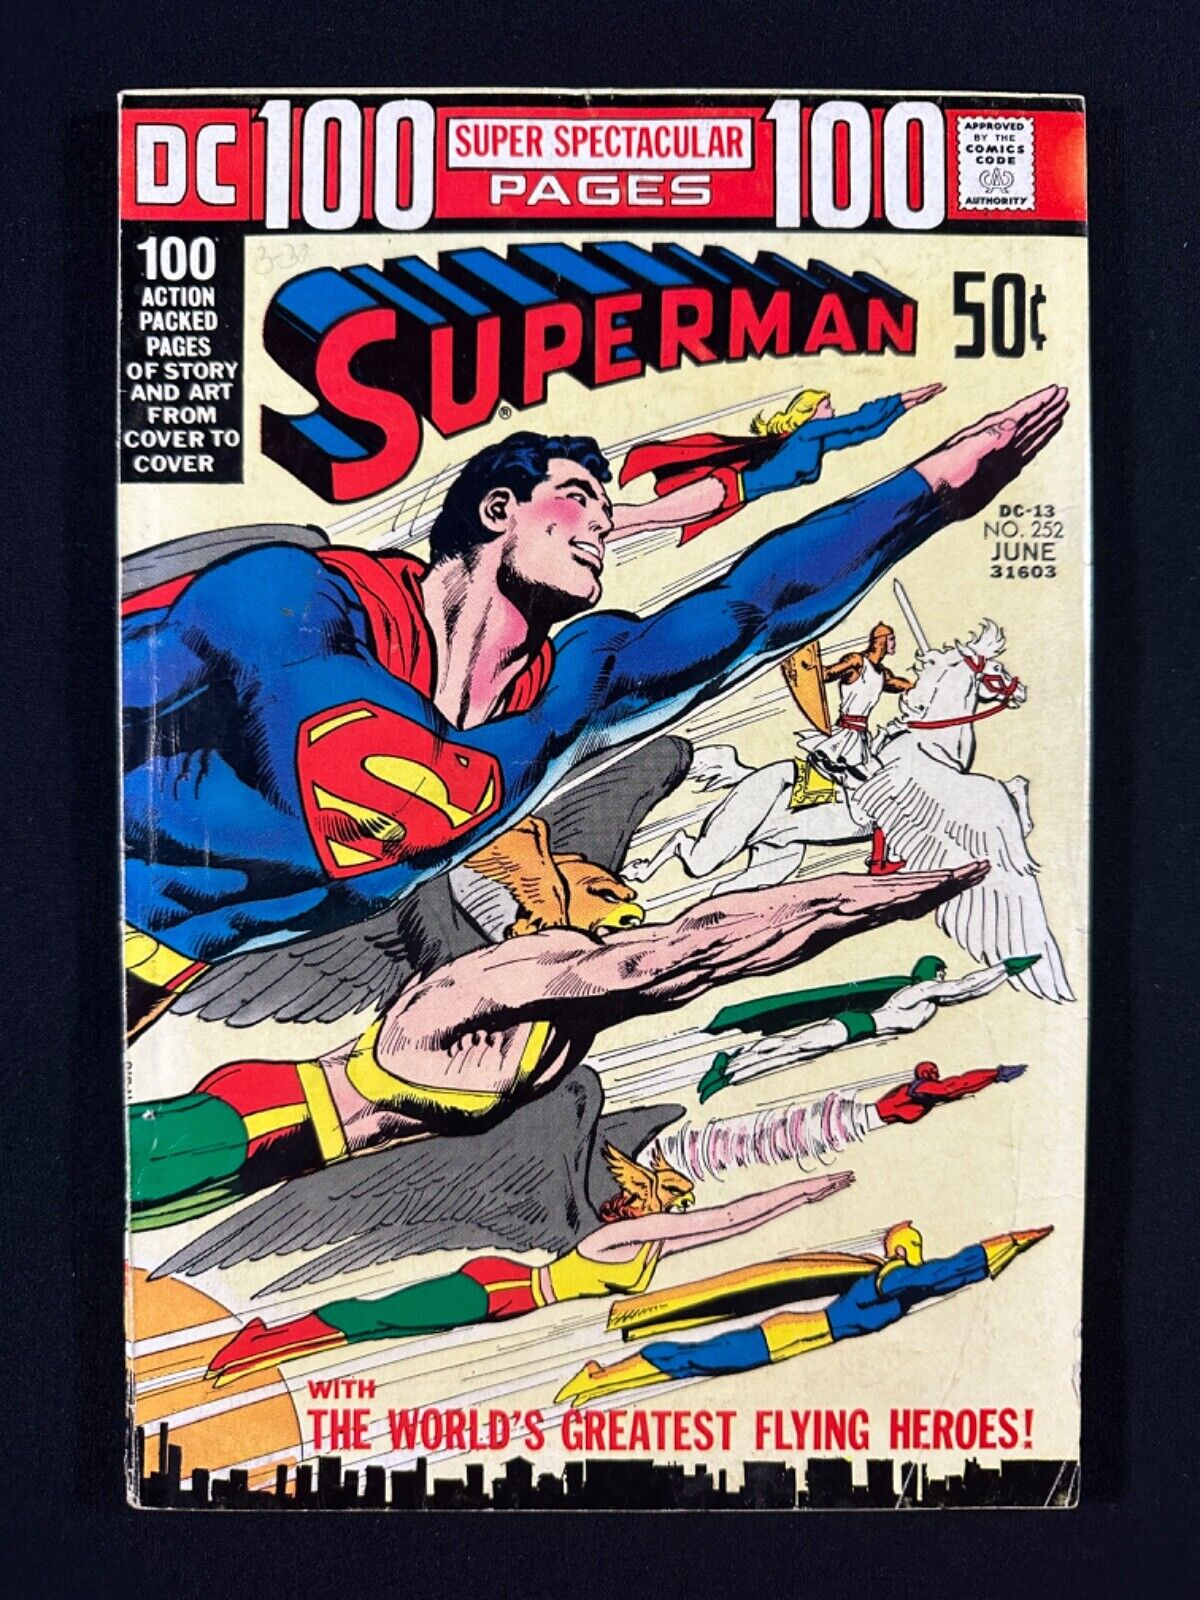 SUPERMAN #252 / 1972 / 100 Page Spectacular /  NEAL ADAMS WRAP COVER / 4.5 - 5.0